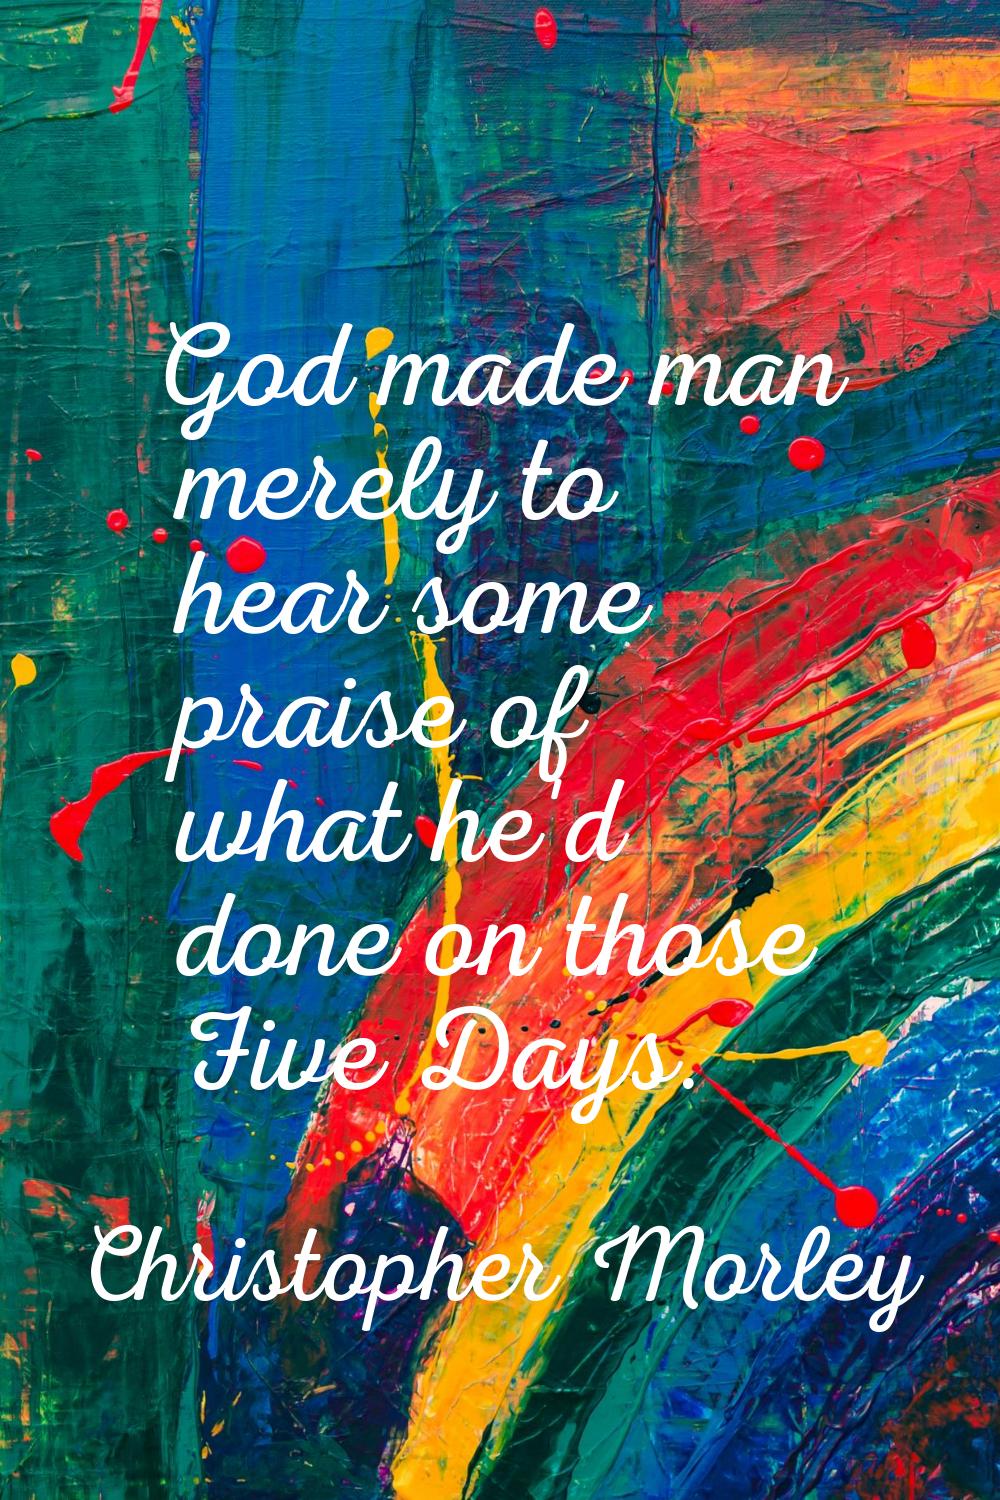 God made man merely to hear some praise of what he'd done on those Five Days.